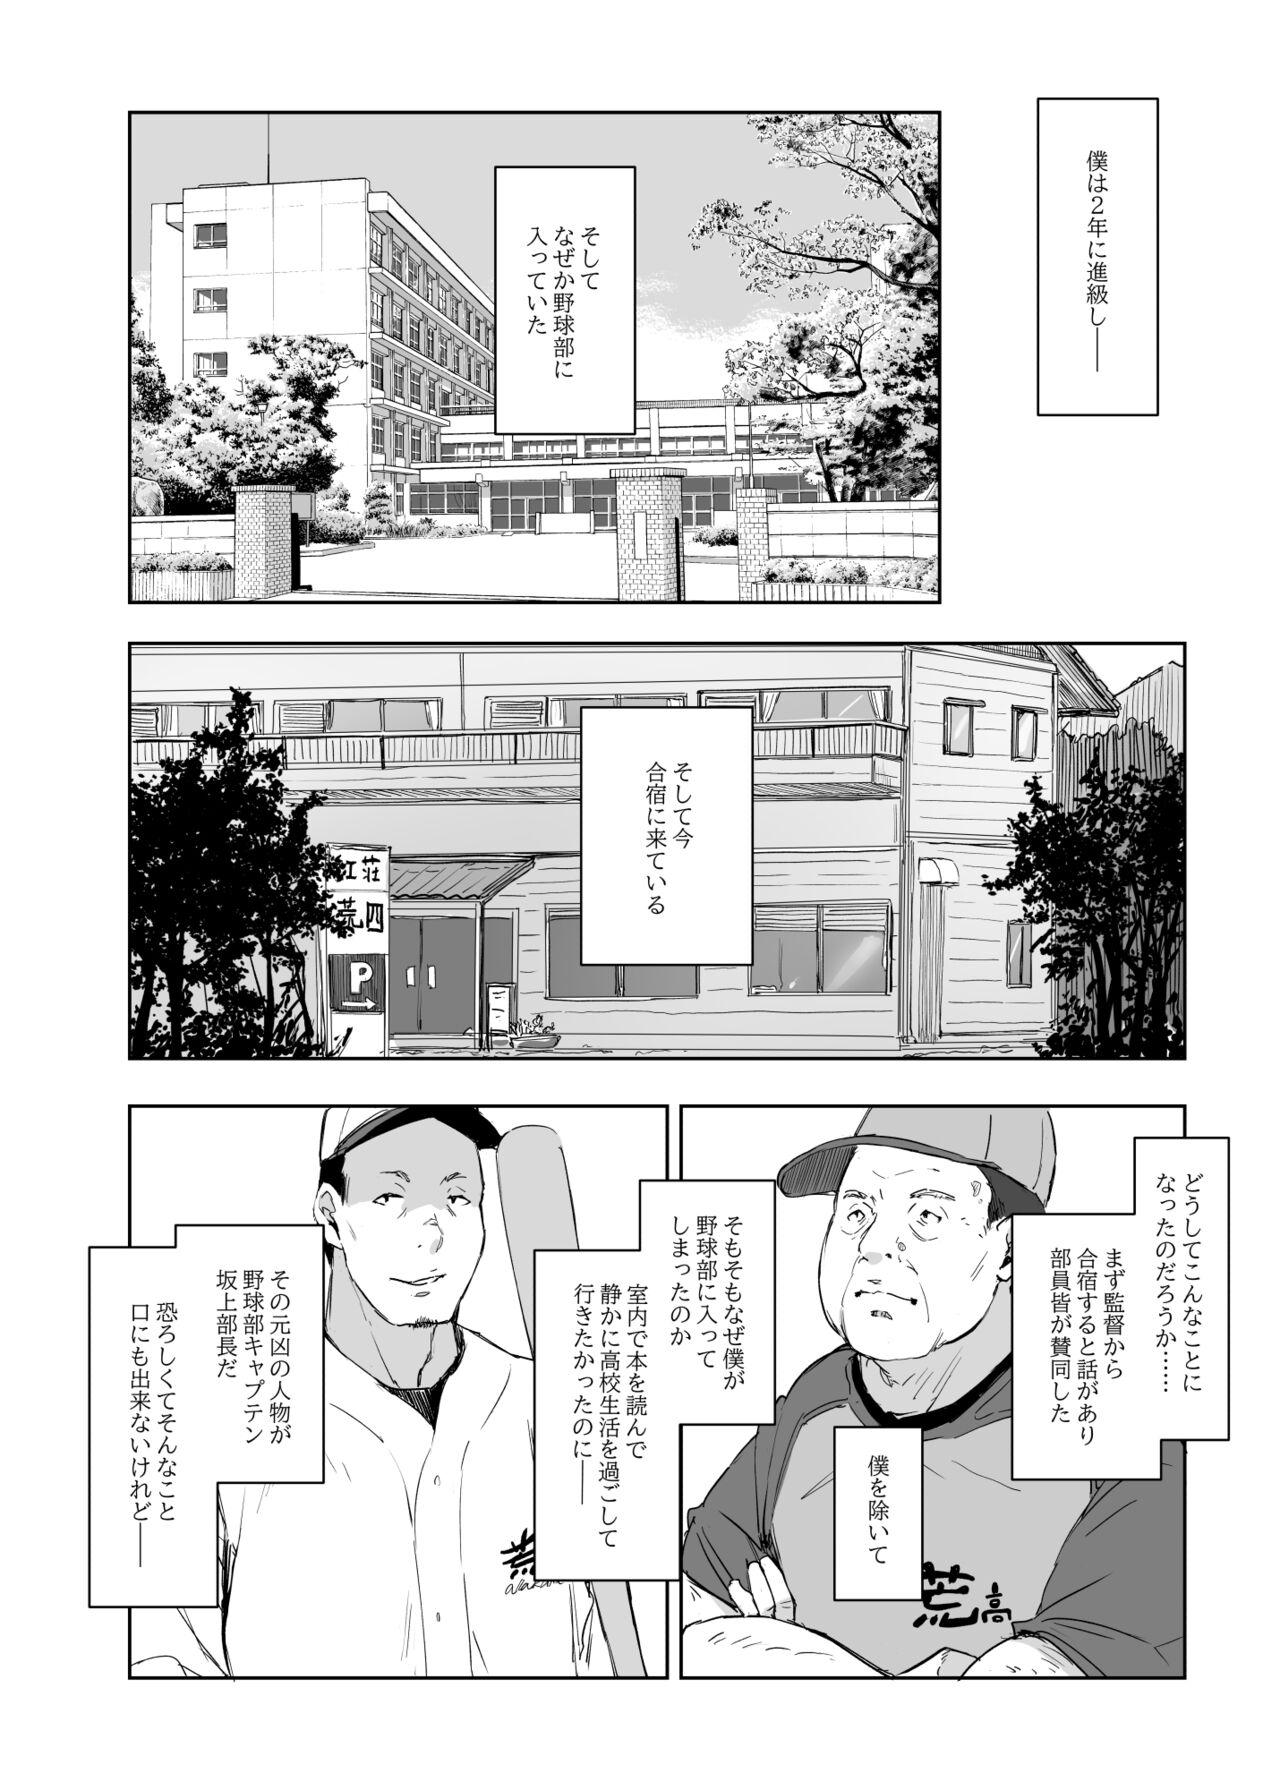 Chacal 僕の彼女は野球部マネージャーver.2.2 - Original Peluda - Page 6